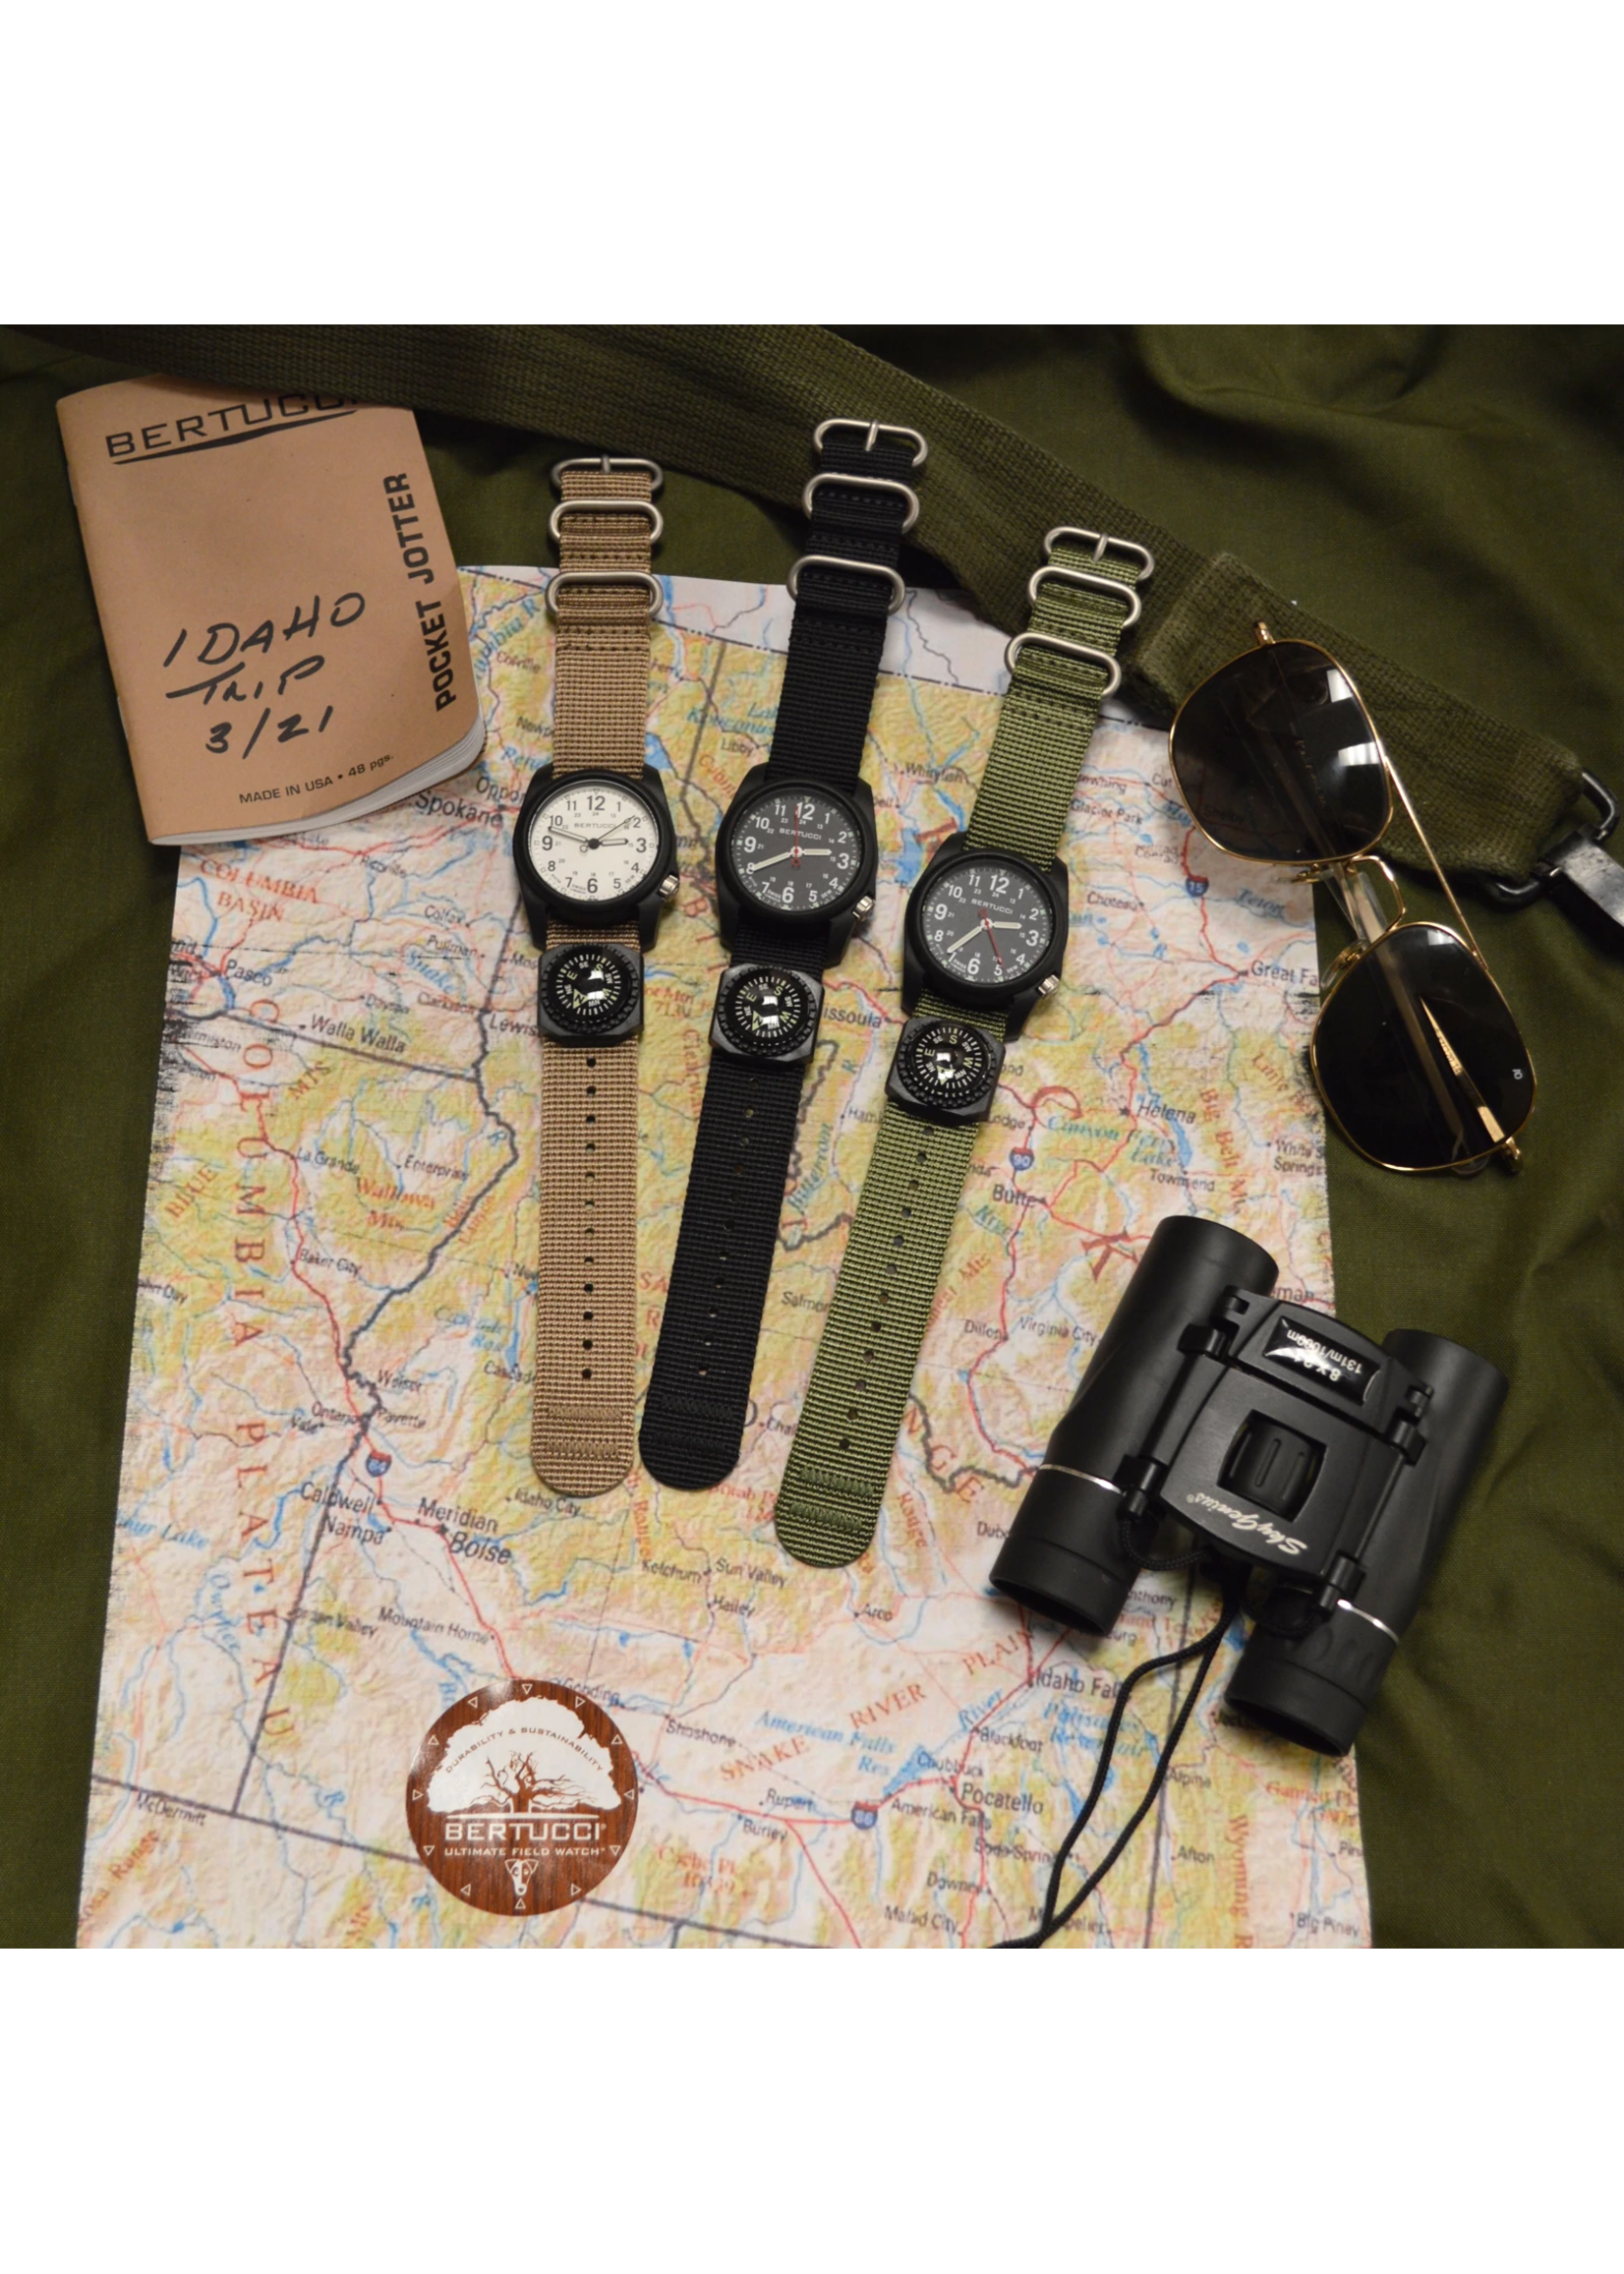 DX3 Compass Black Dial Forrest Band